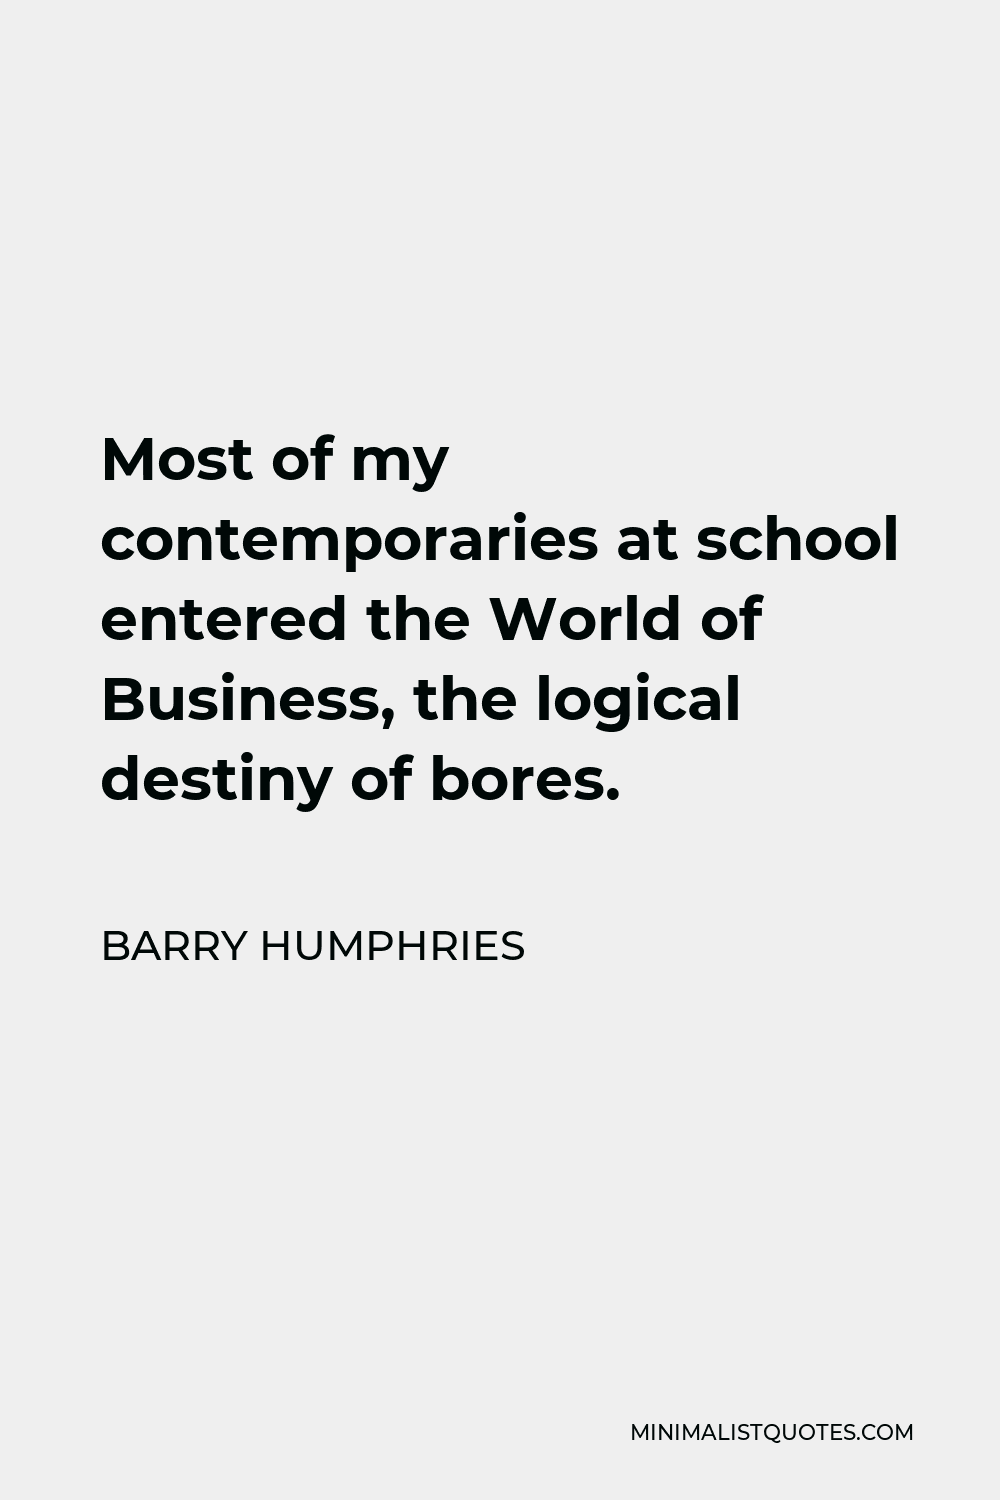 Barry Humphries Quote - Most of my contemporaries at school entered the World of Business, the logical destiny of bores.